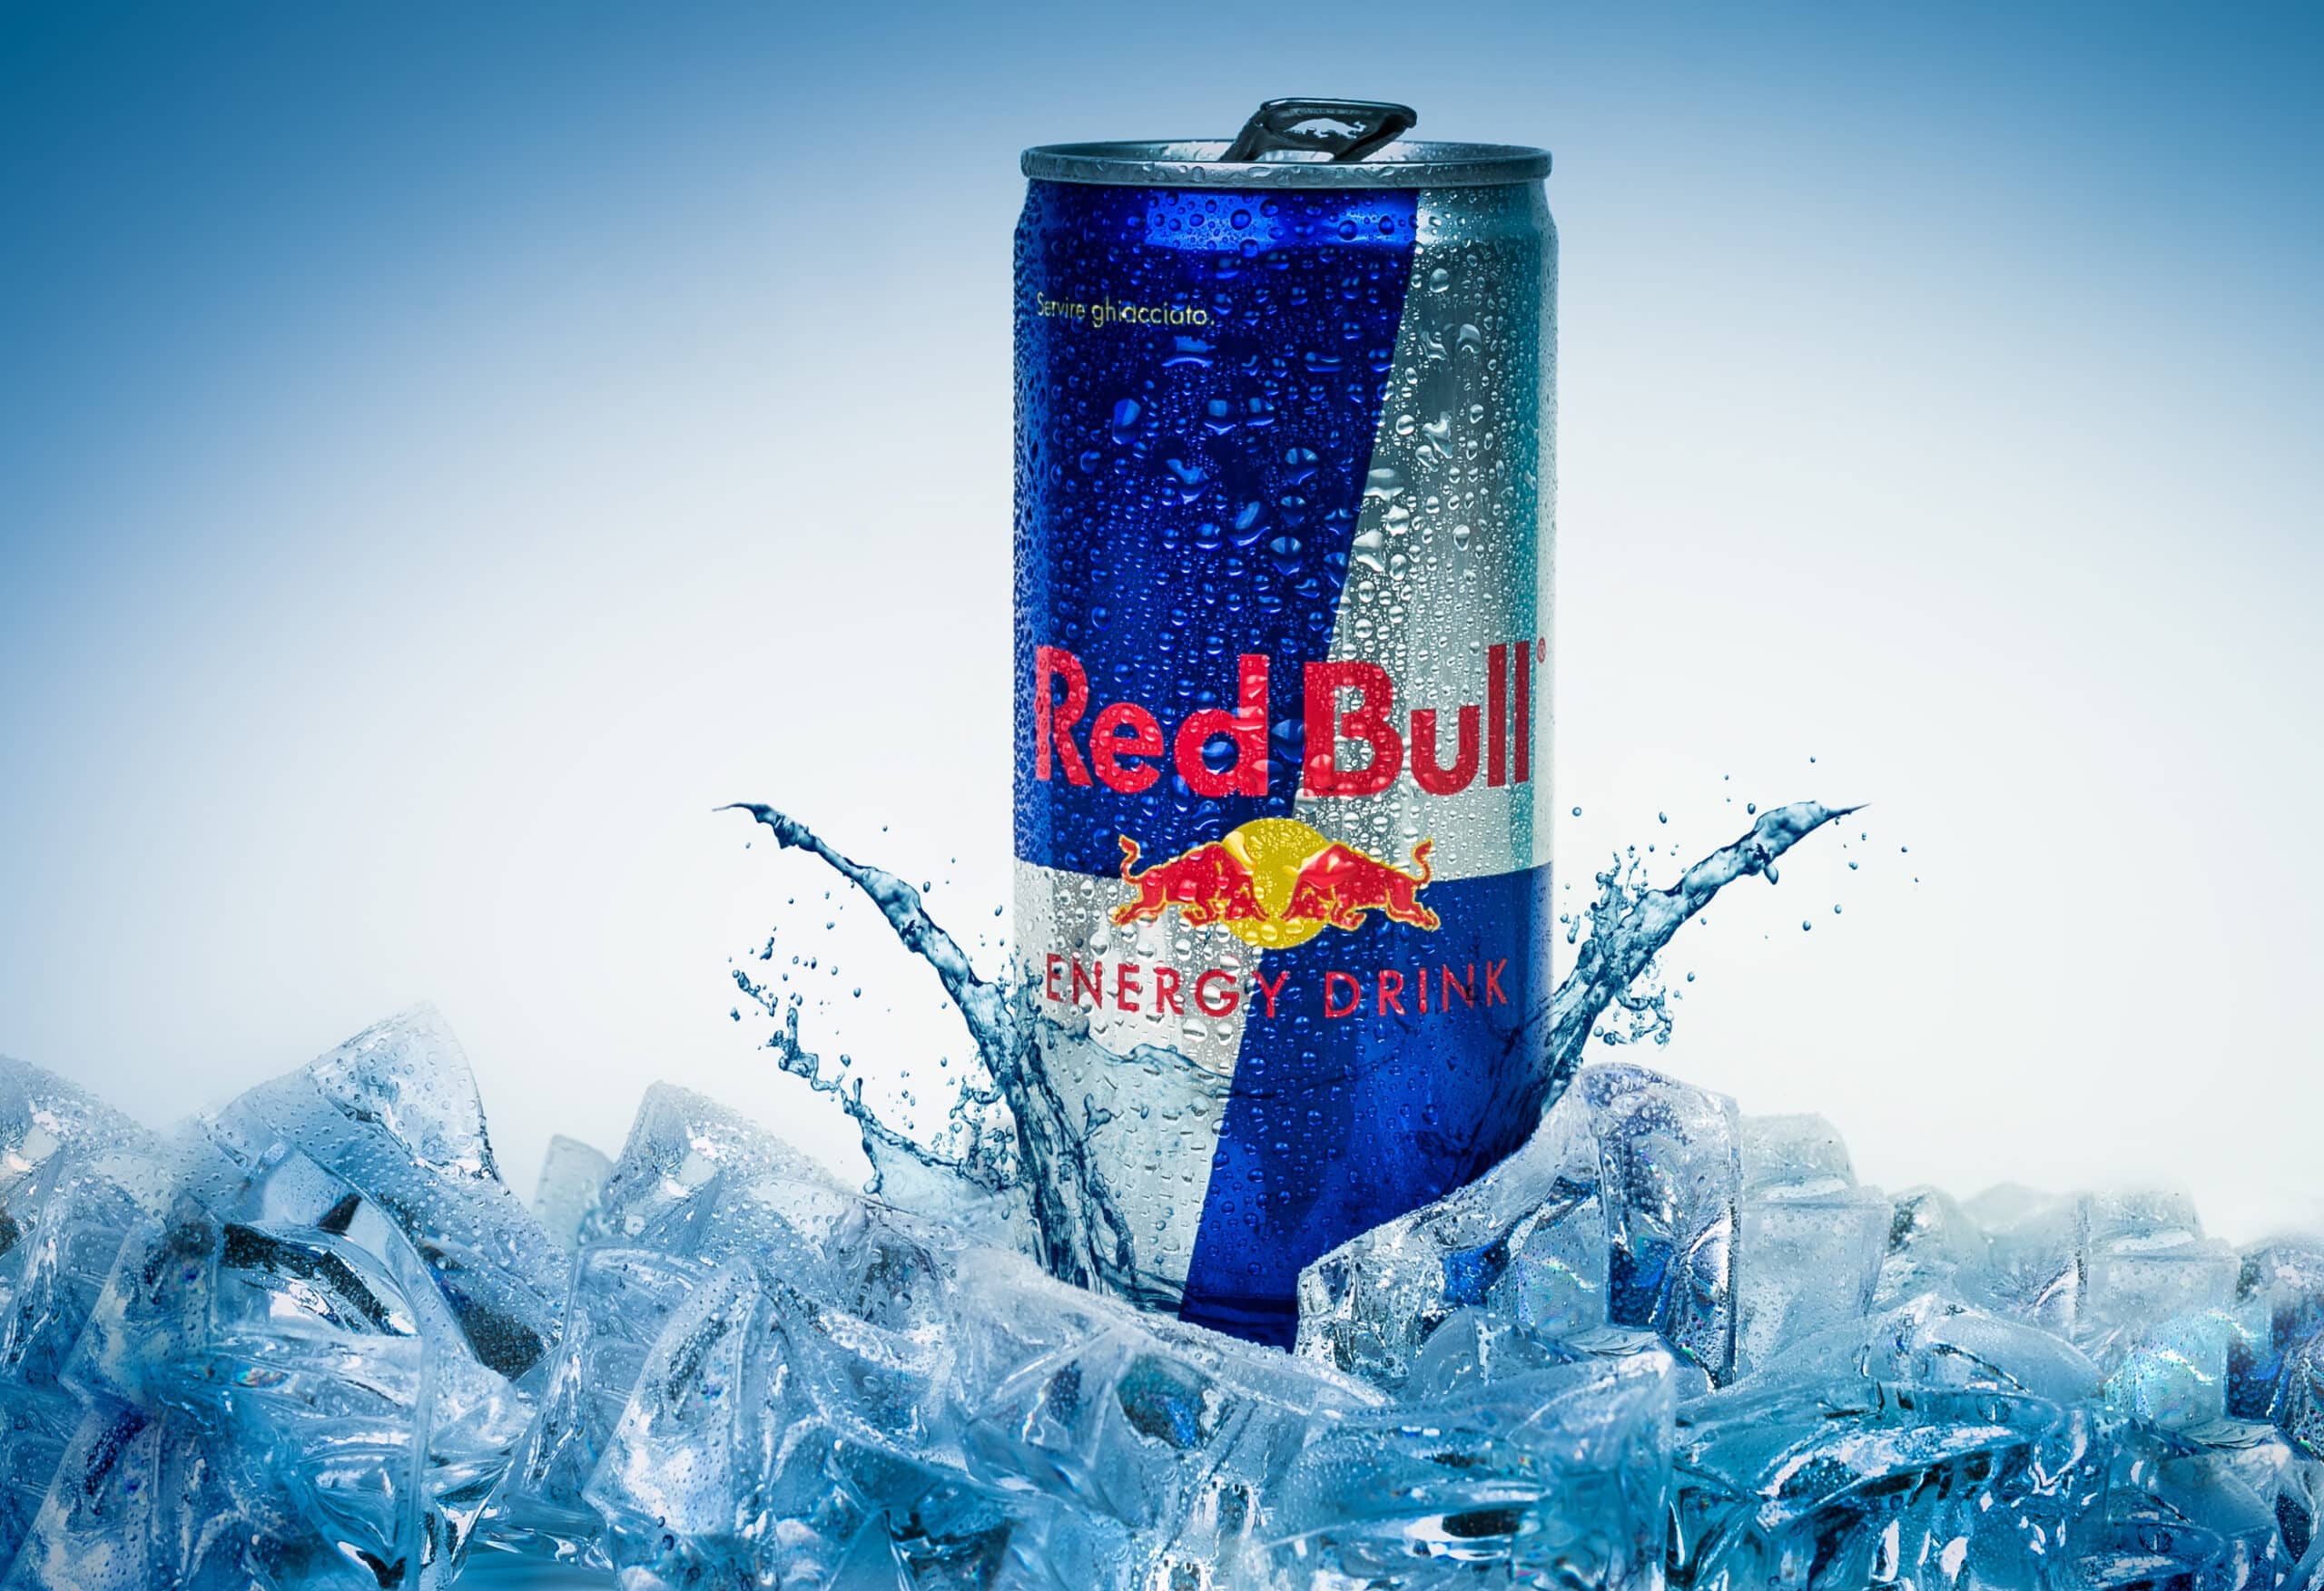 Energy Drinks and Ice Chewing … The Hype and The Crunch